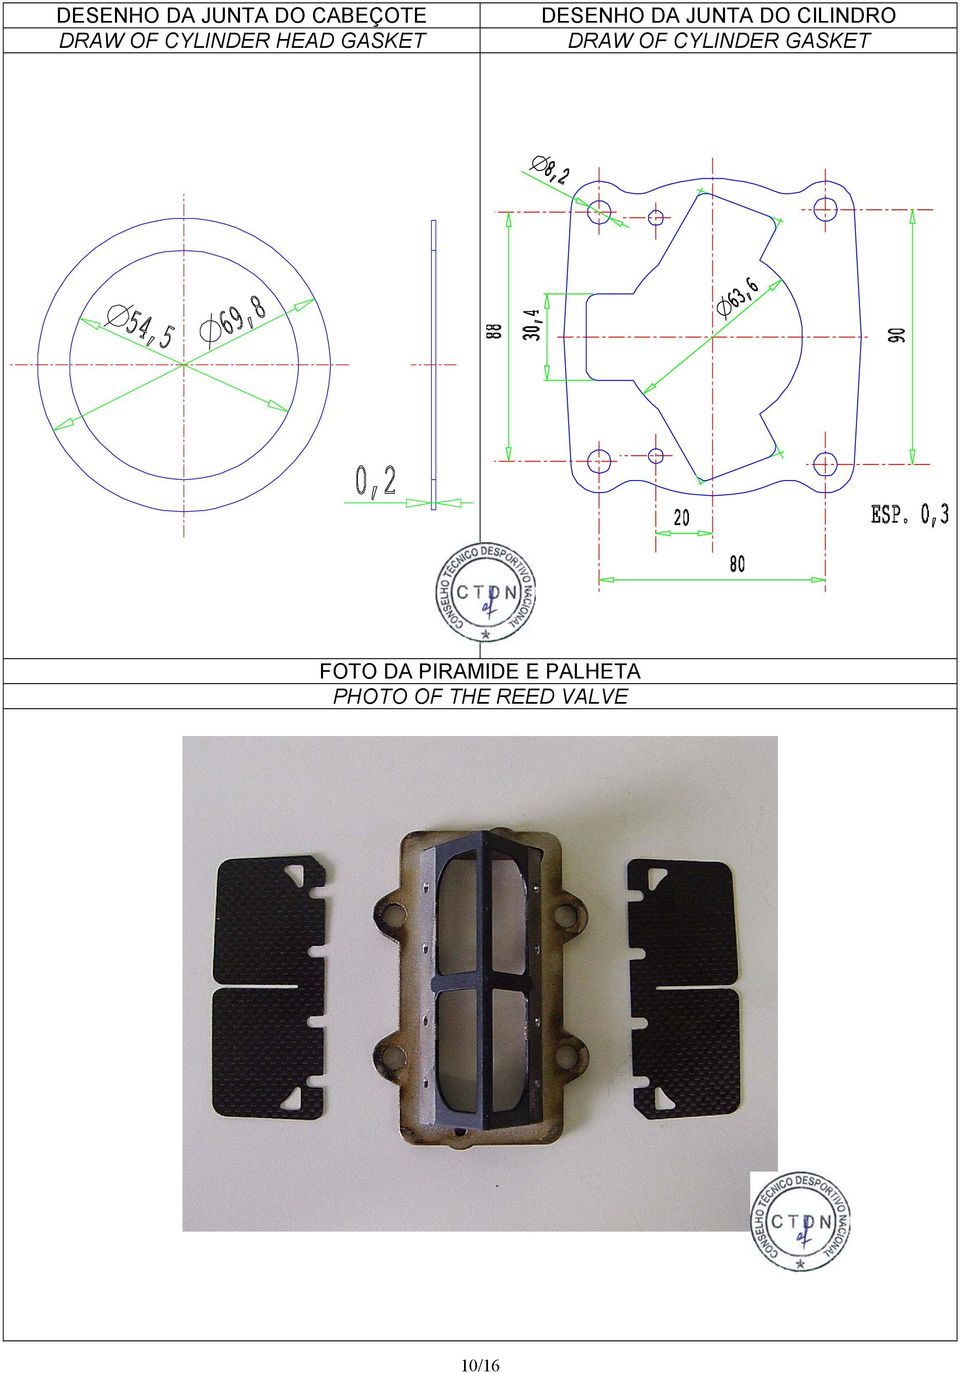 DO CILINDRO DRAW OF CYLINDER GASKET